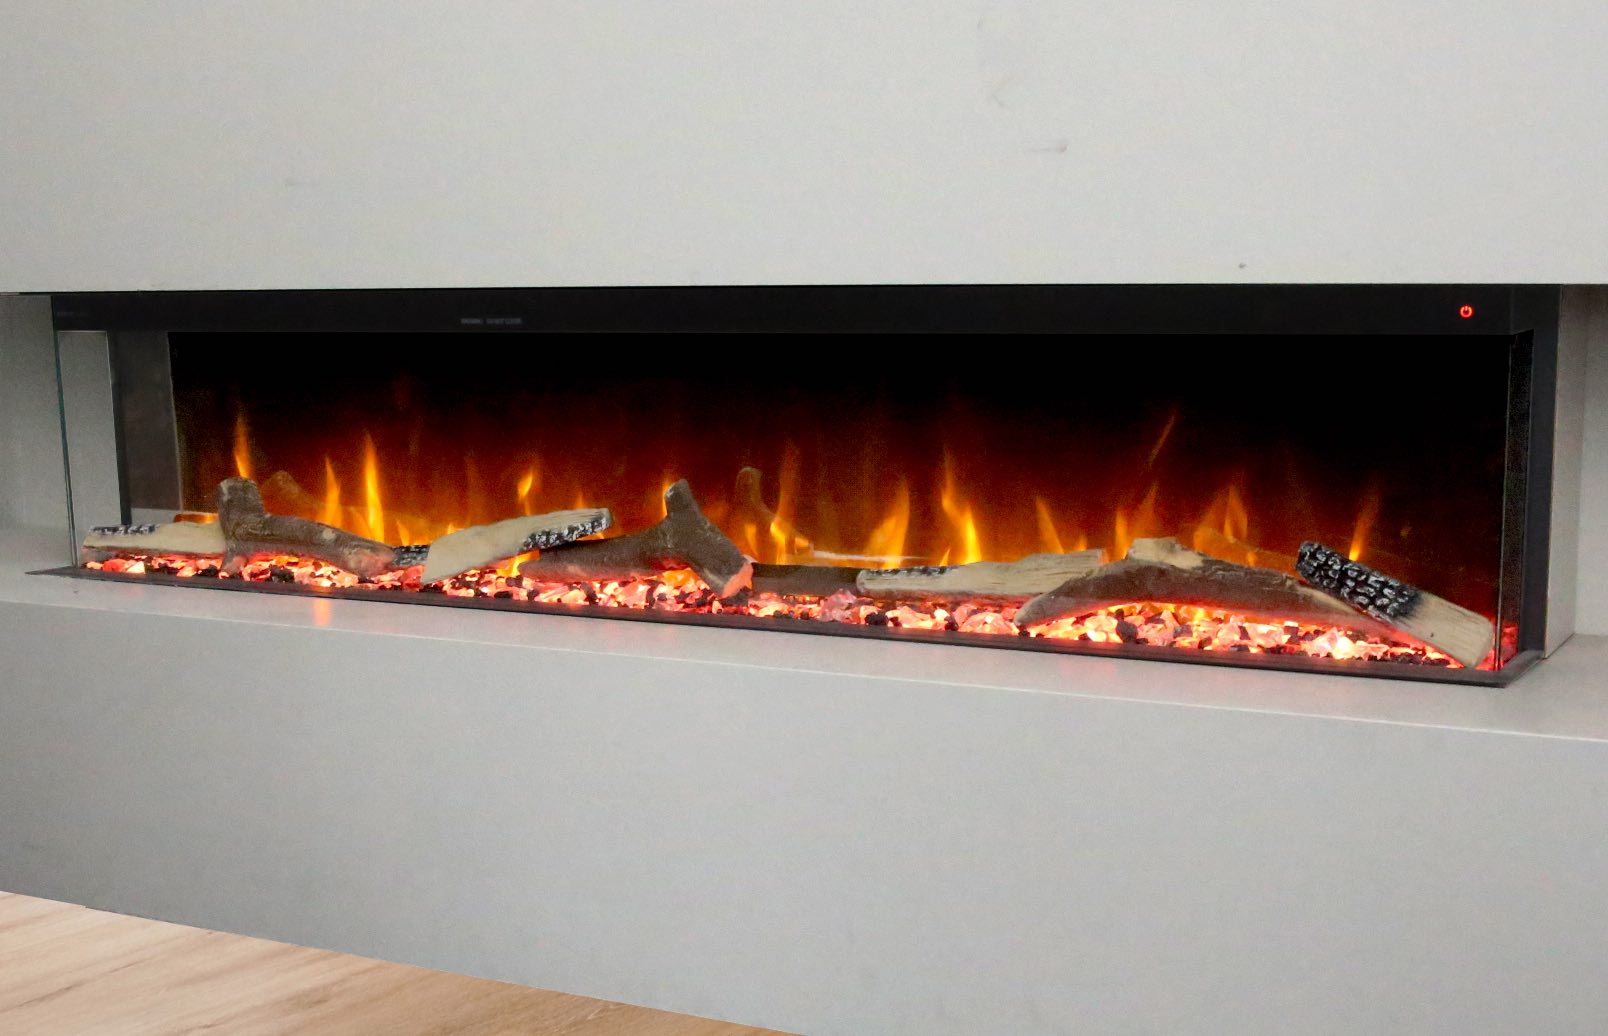 How much does an electric fireplace cost to run?